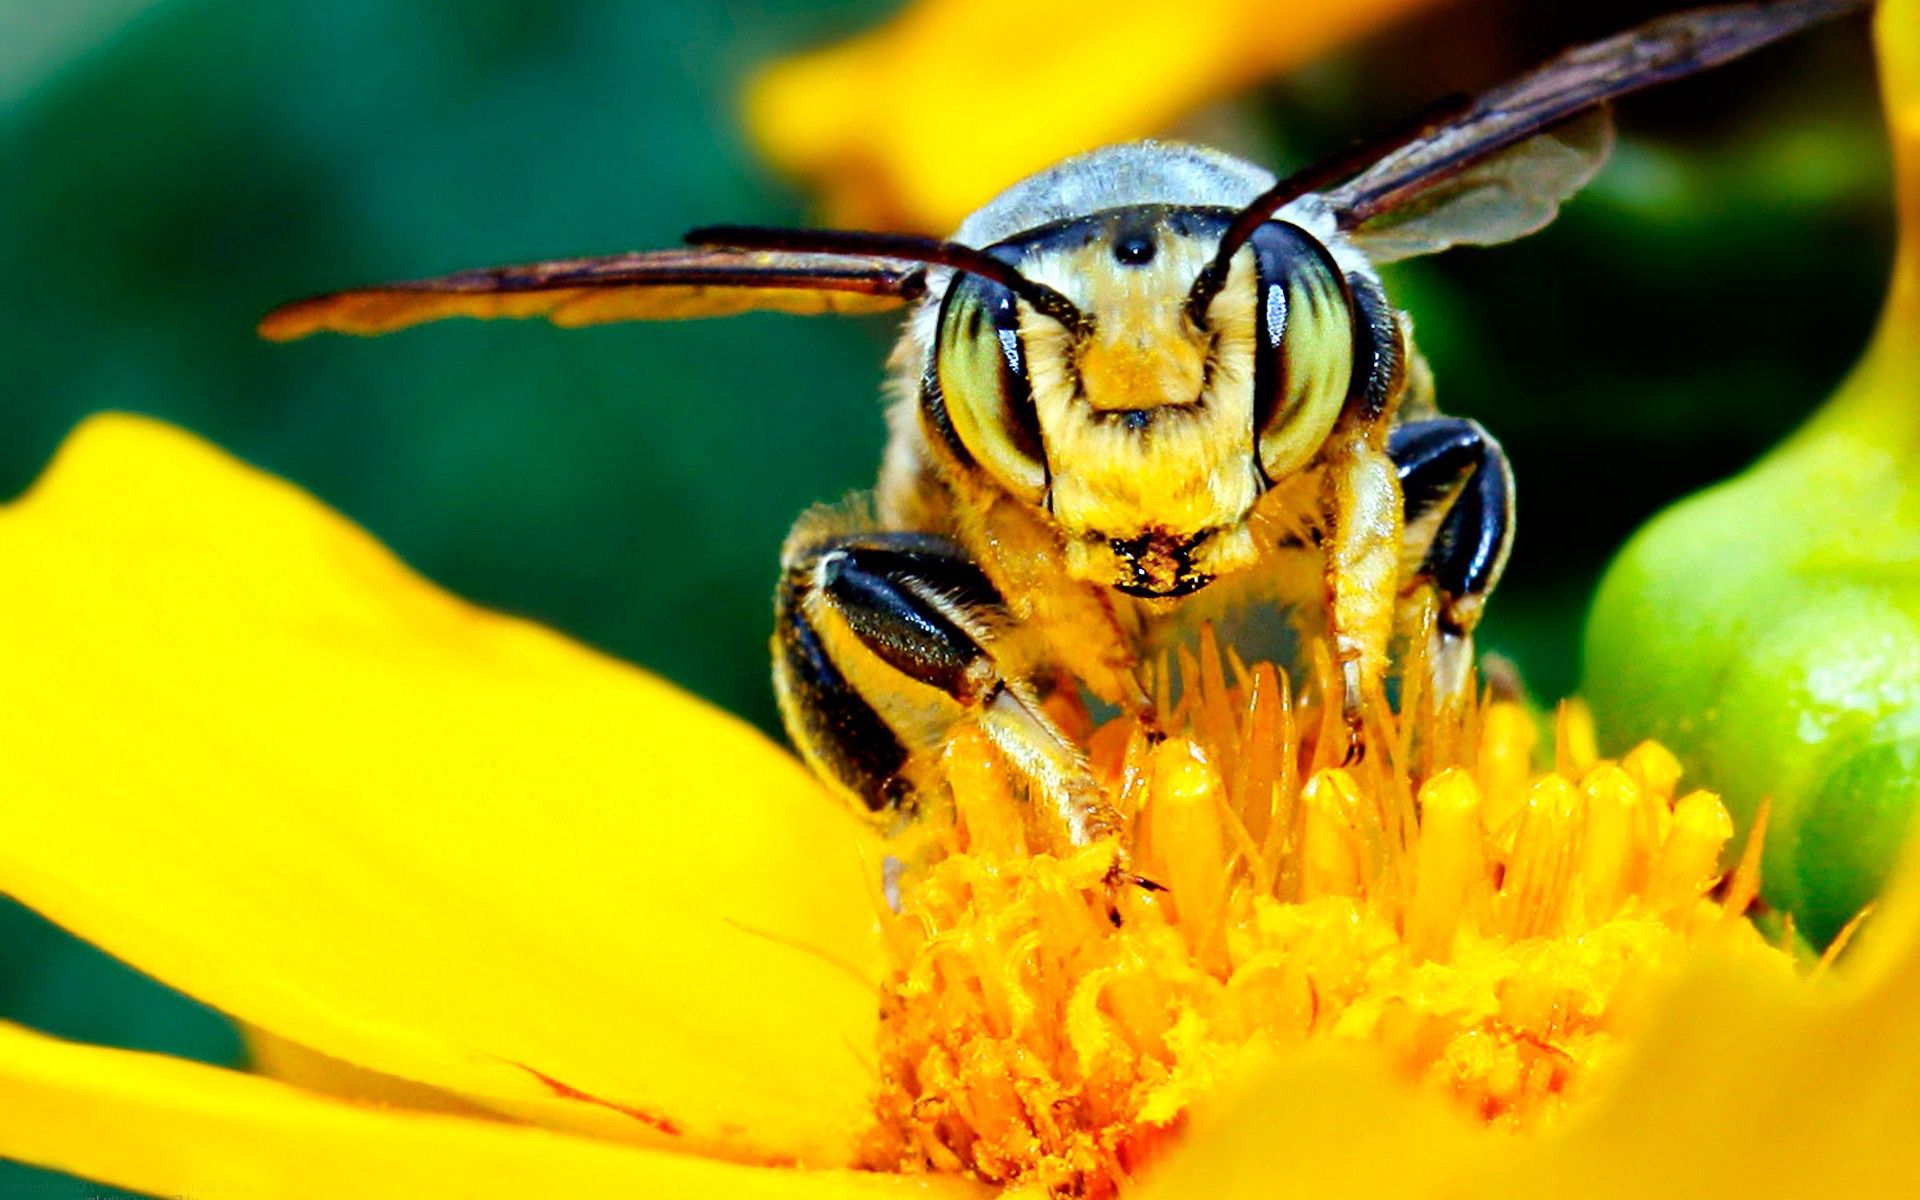 Bees can identify the human face